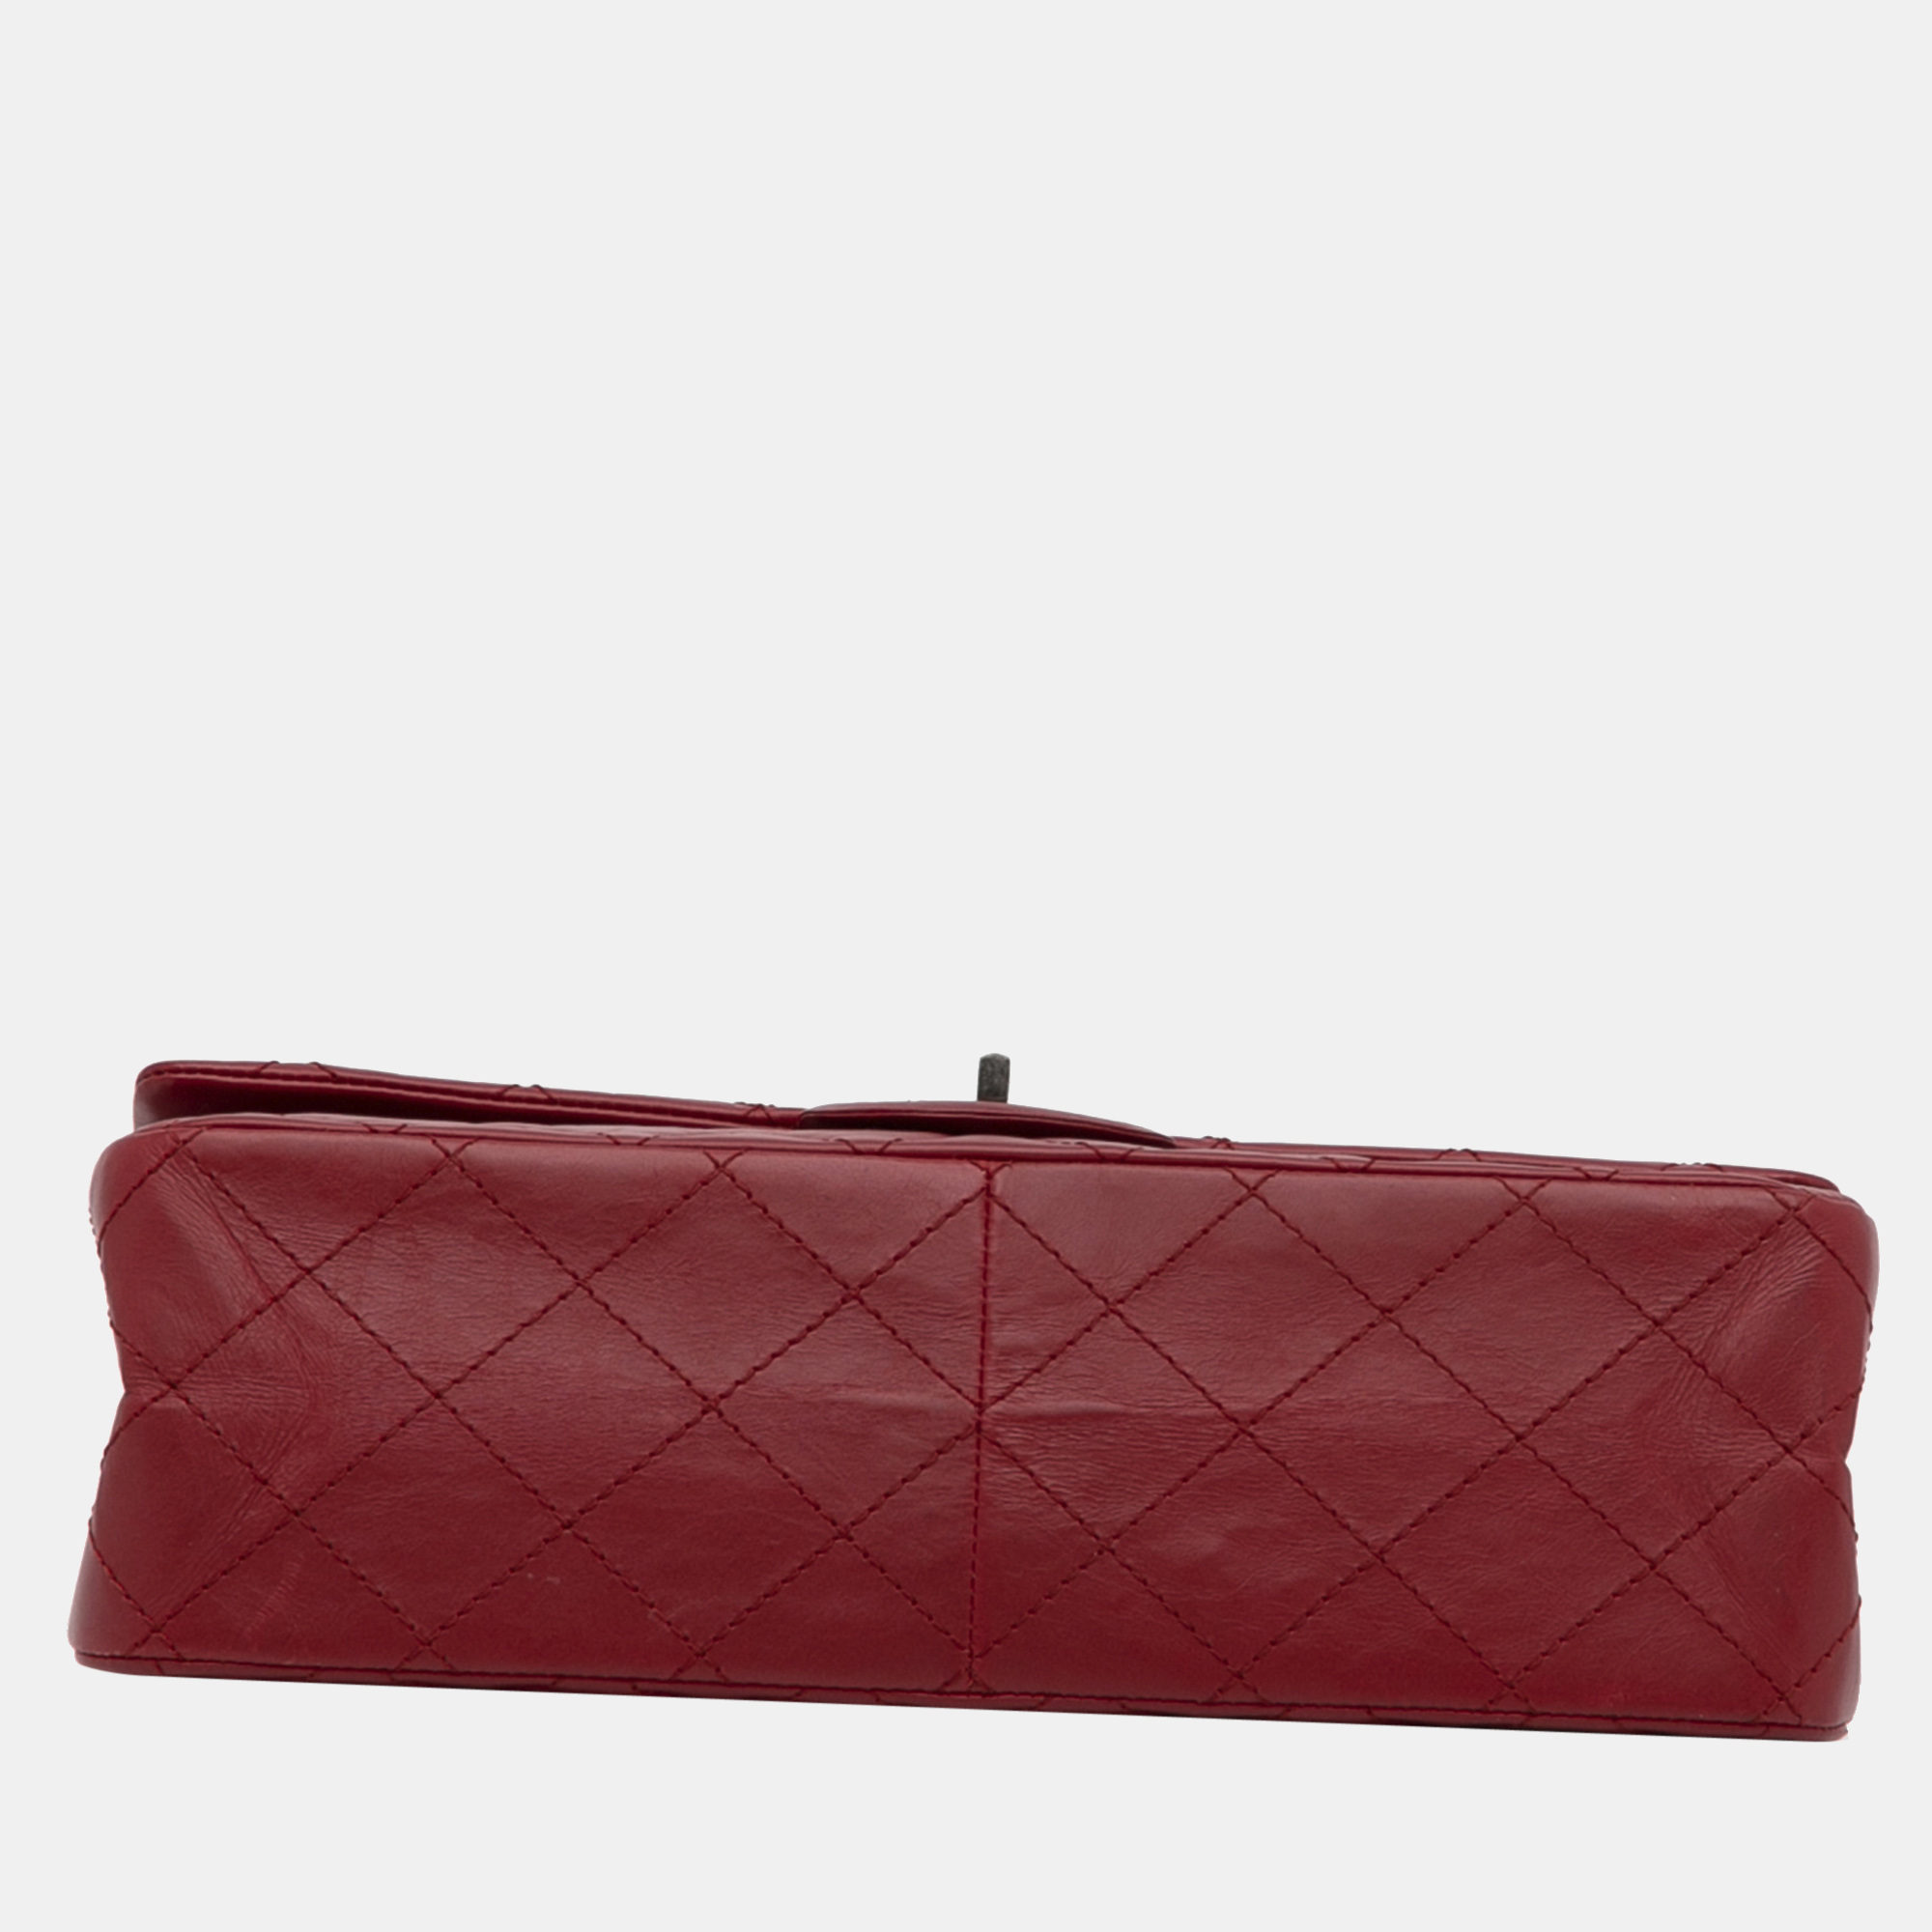 Chanel Red Reissue 2.55 Aged Calfskin Double Flap 227